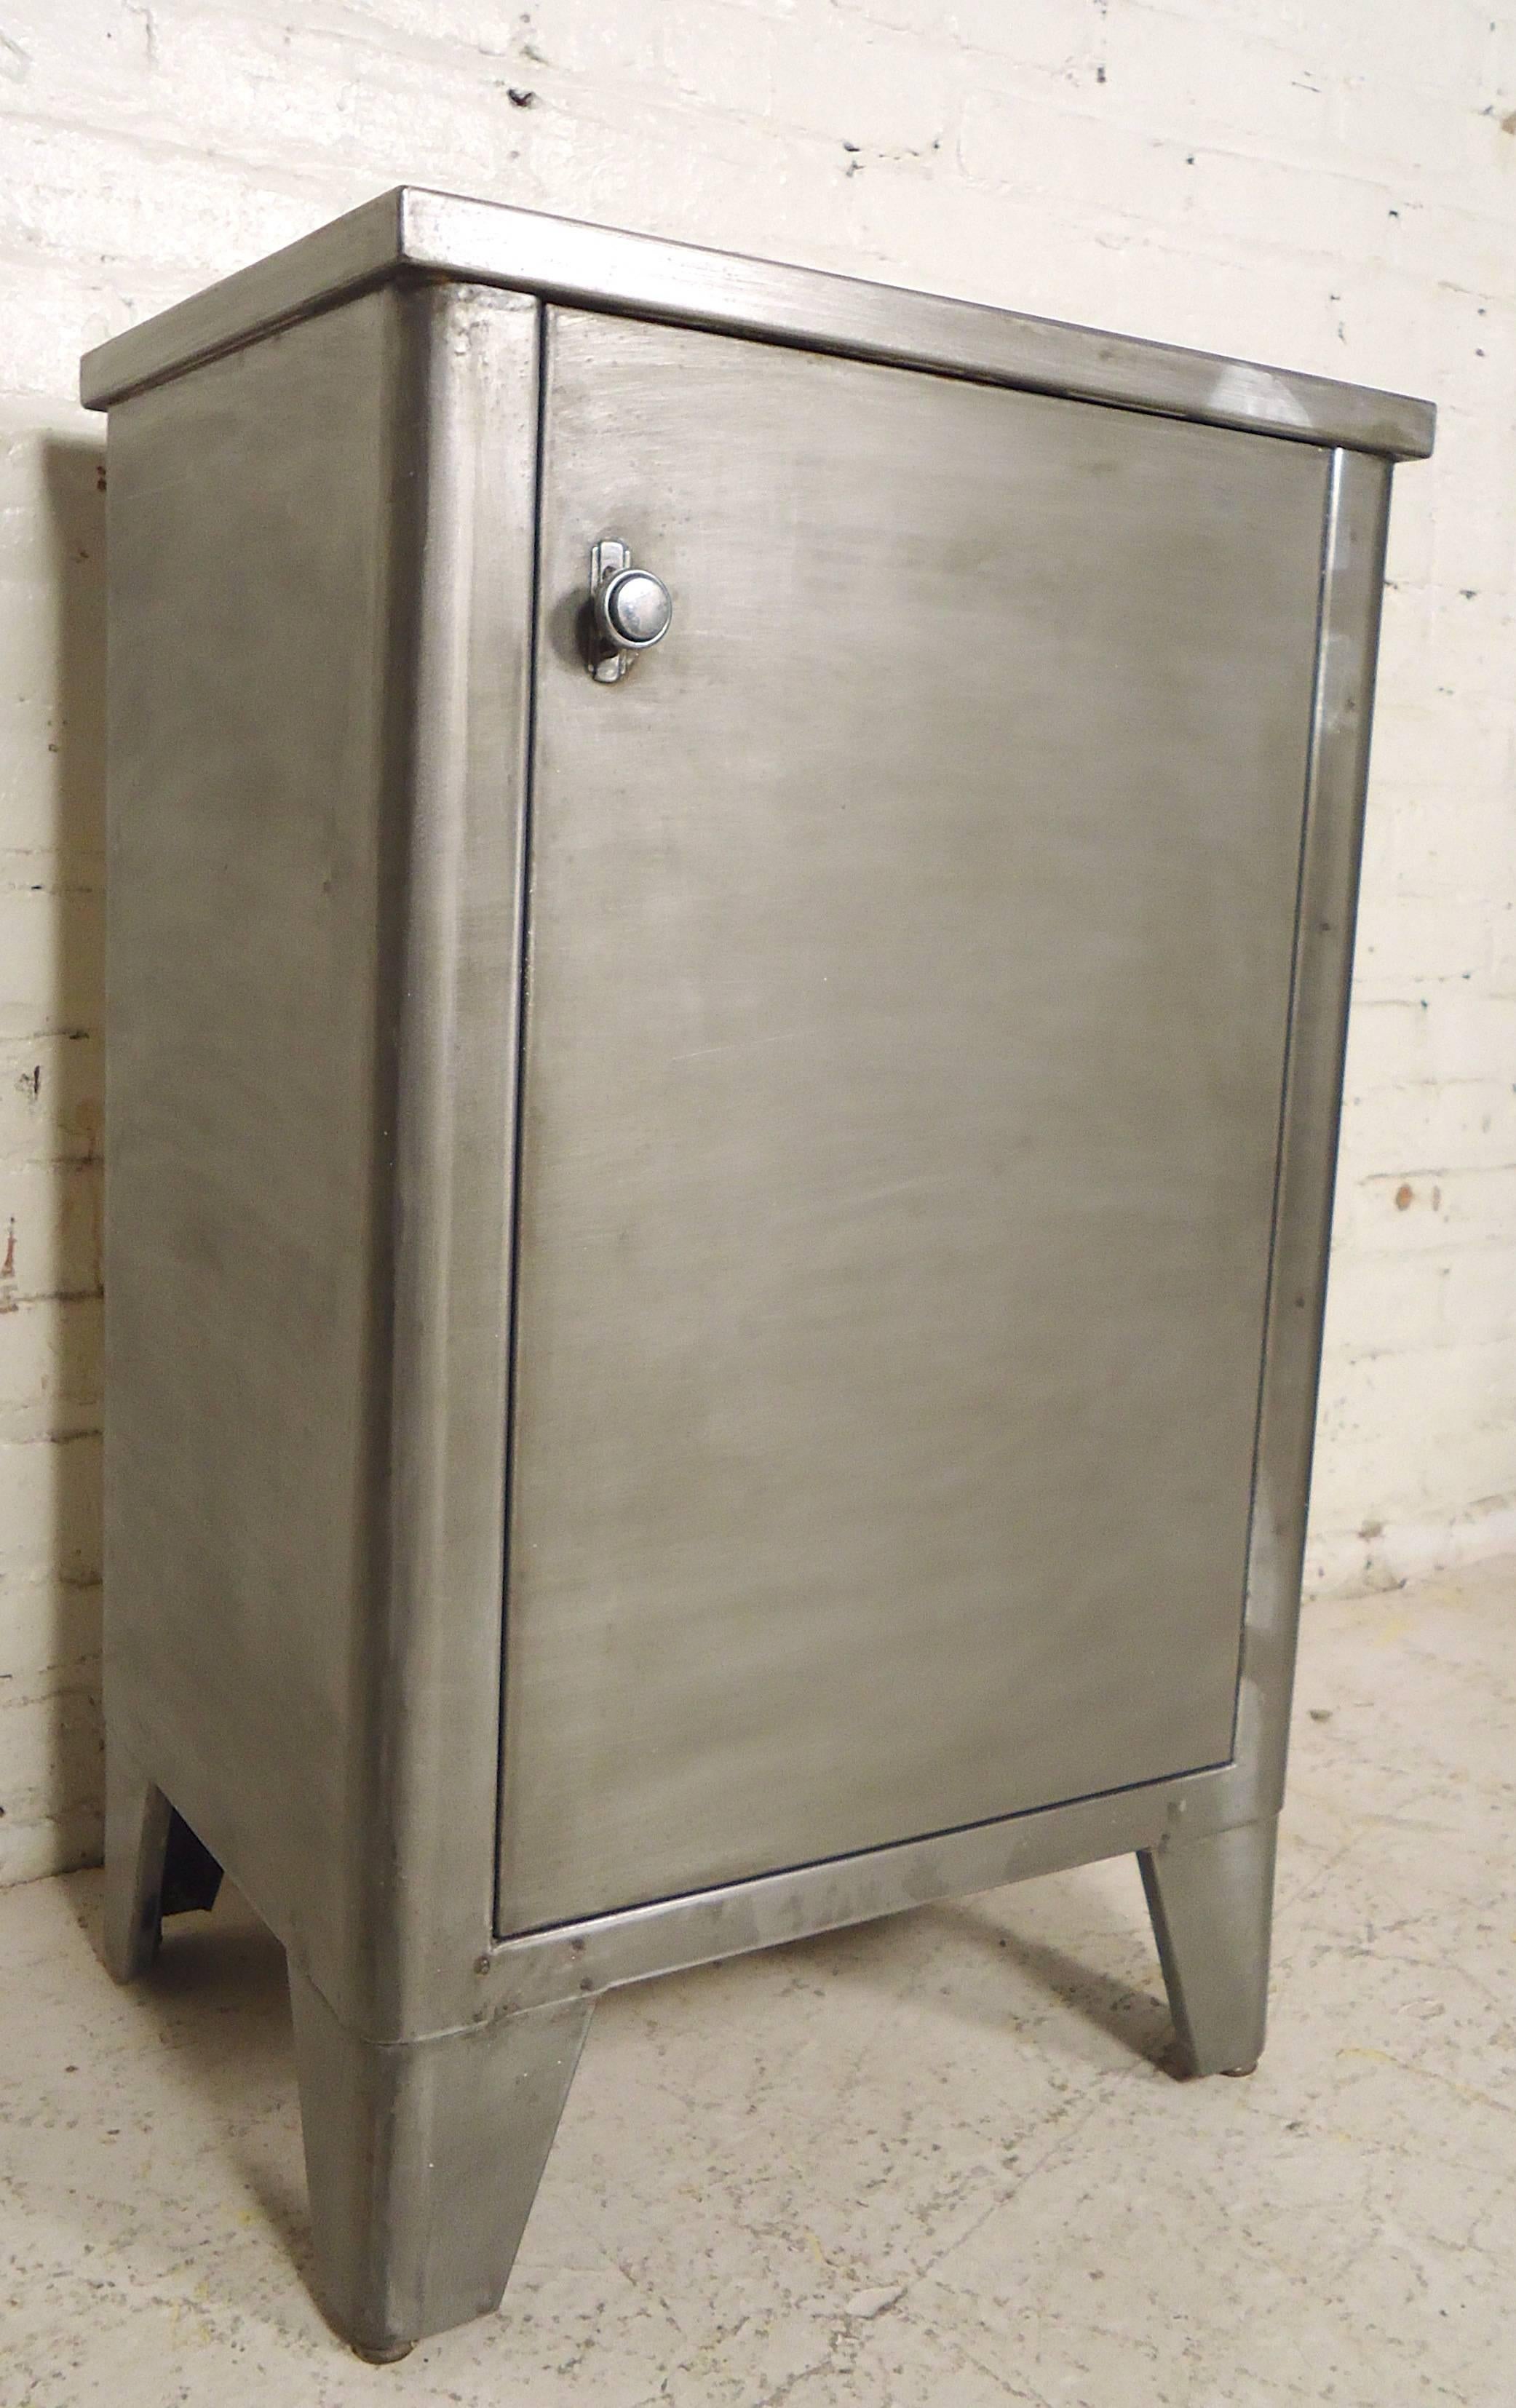 Industrial metal cabinet restored in a bare metal style finish. Unique push button lock, removable shelves. Great as bathroom storage or bedside table.

(Please confirm item location - NY or NJ - with dealer).
 